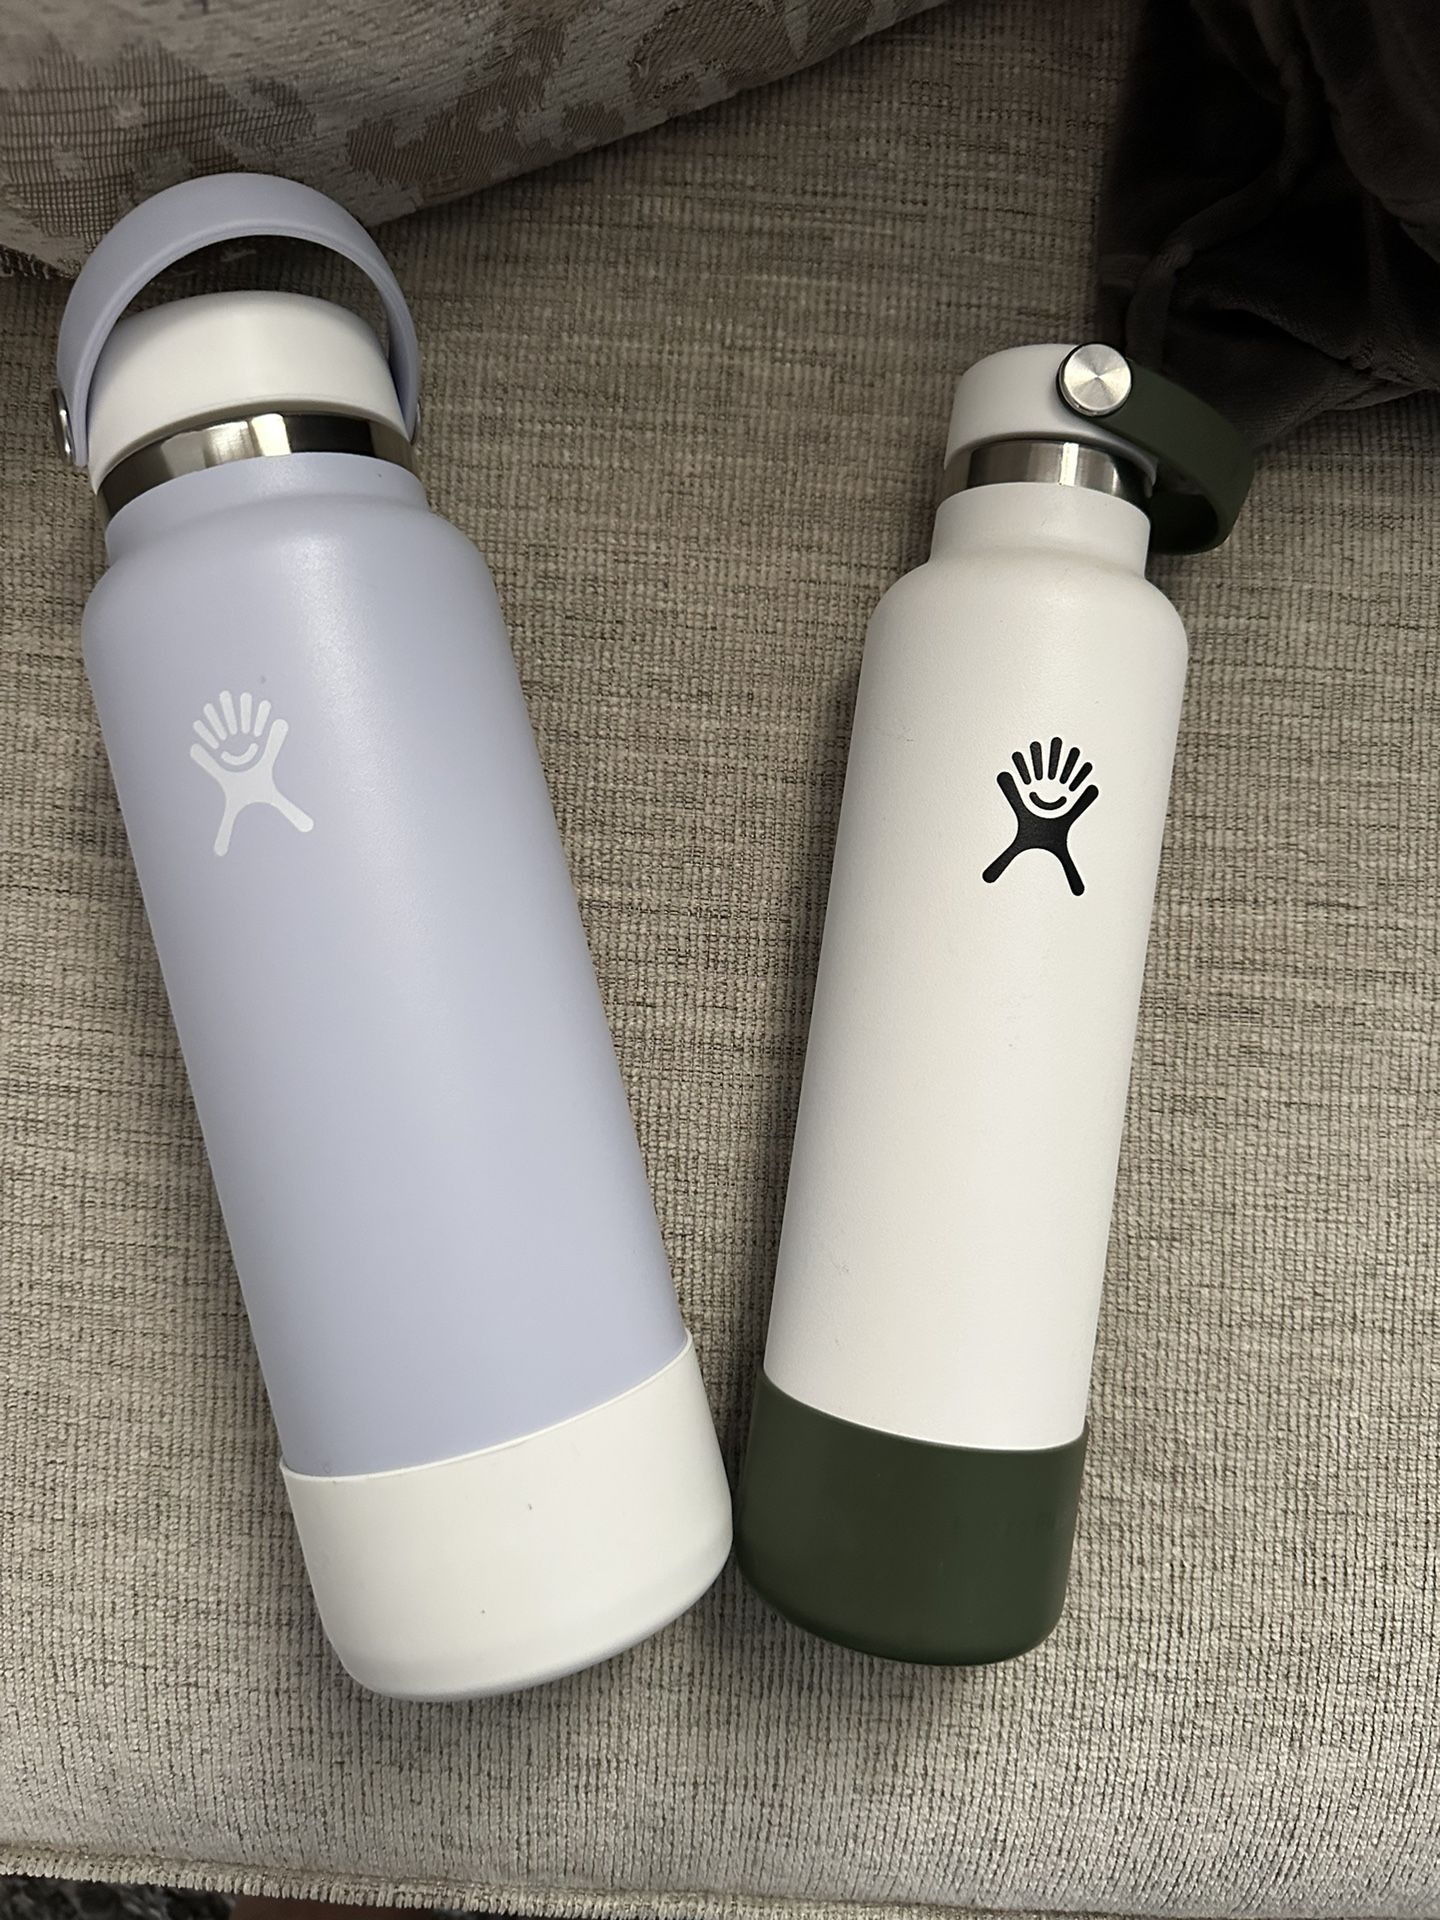 Iron Flask stainless steel water bottle for Sale in Irvine, CA - OfferUp